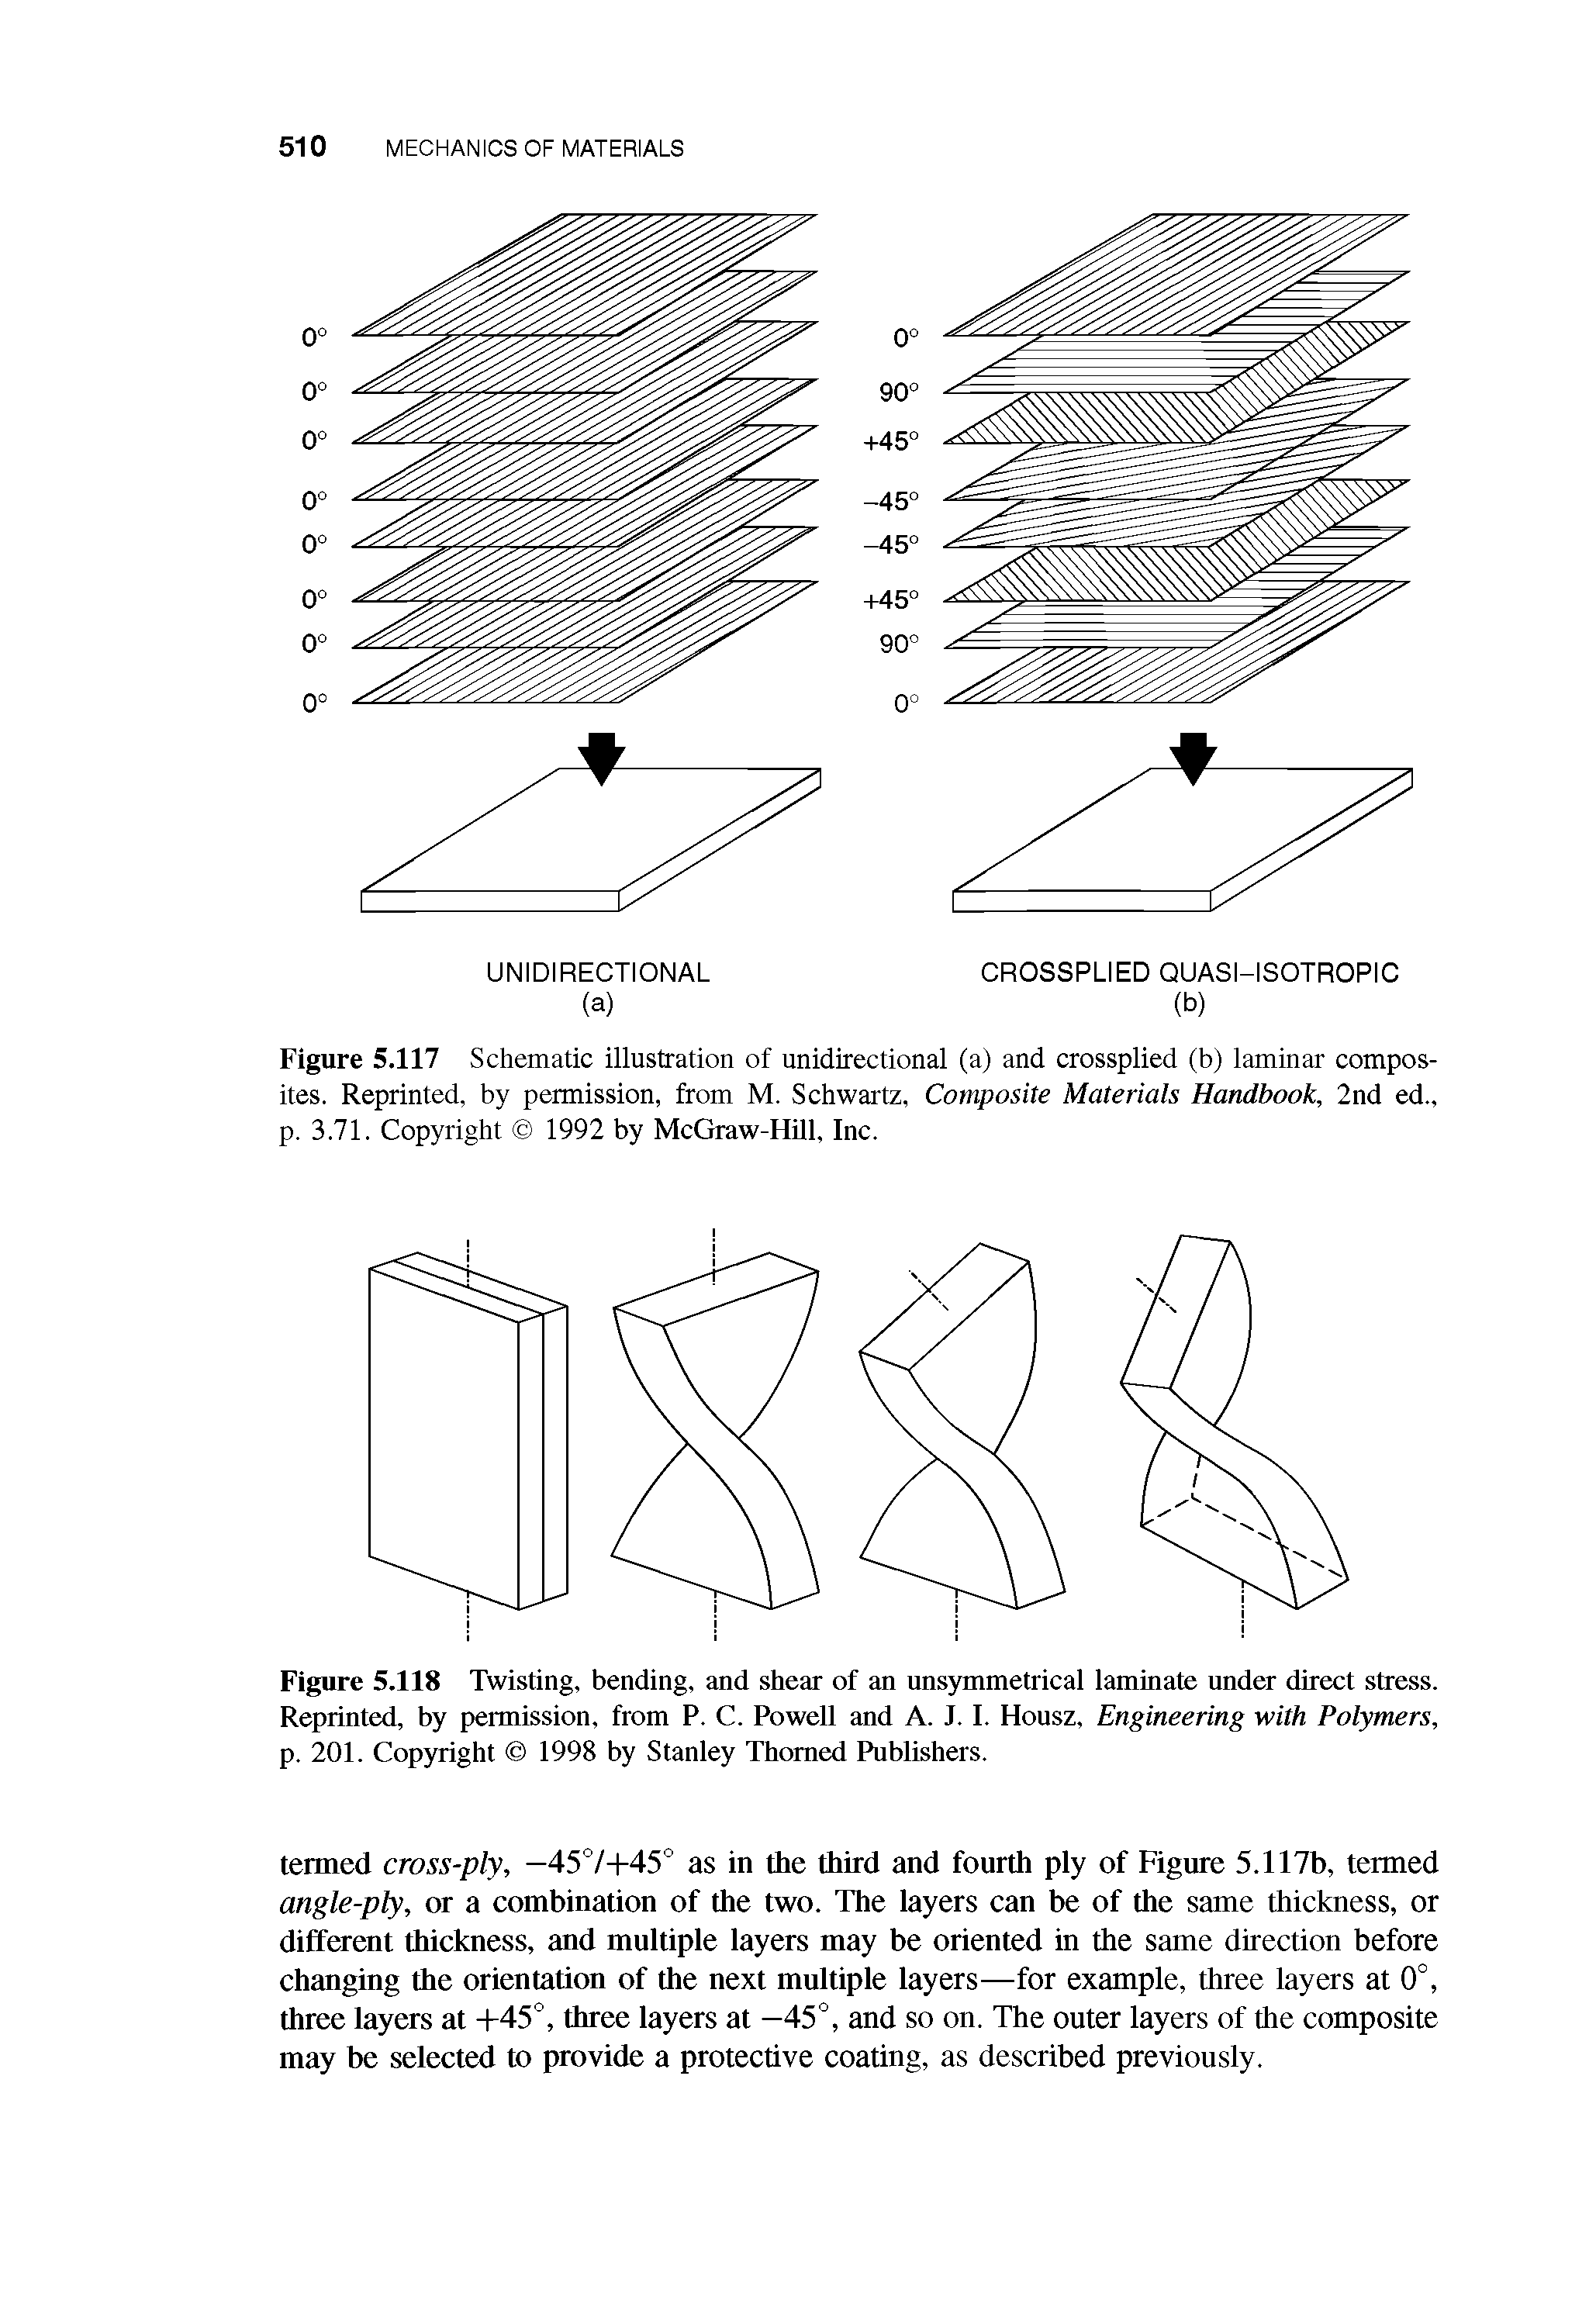 Figure 5.118 Twisting, bending, and shear of an unsymmetrical laminate under direct stress. Reprinted, by permission, from P. C. Powell and A. J. I. Housz, Engineering with Polymers, p. 201. Copyright 1998 by Stanley Thomed Publishers.